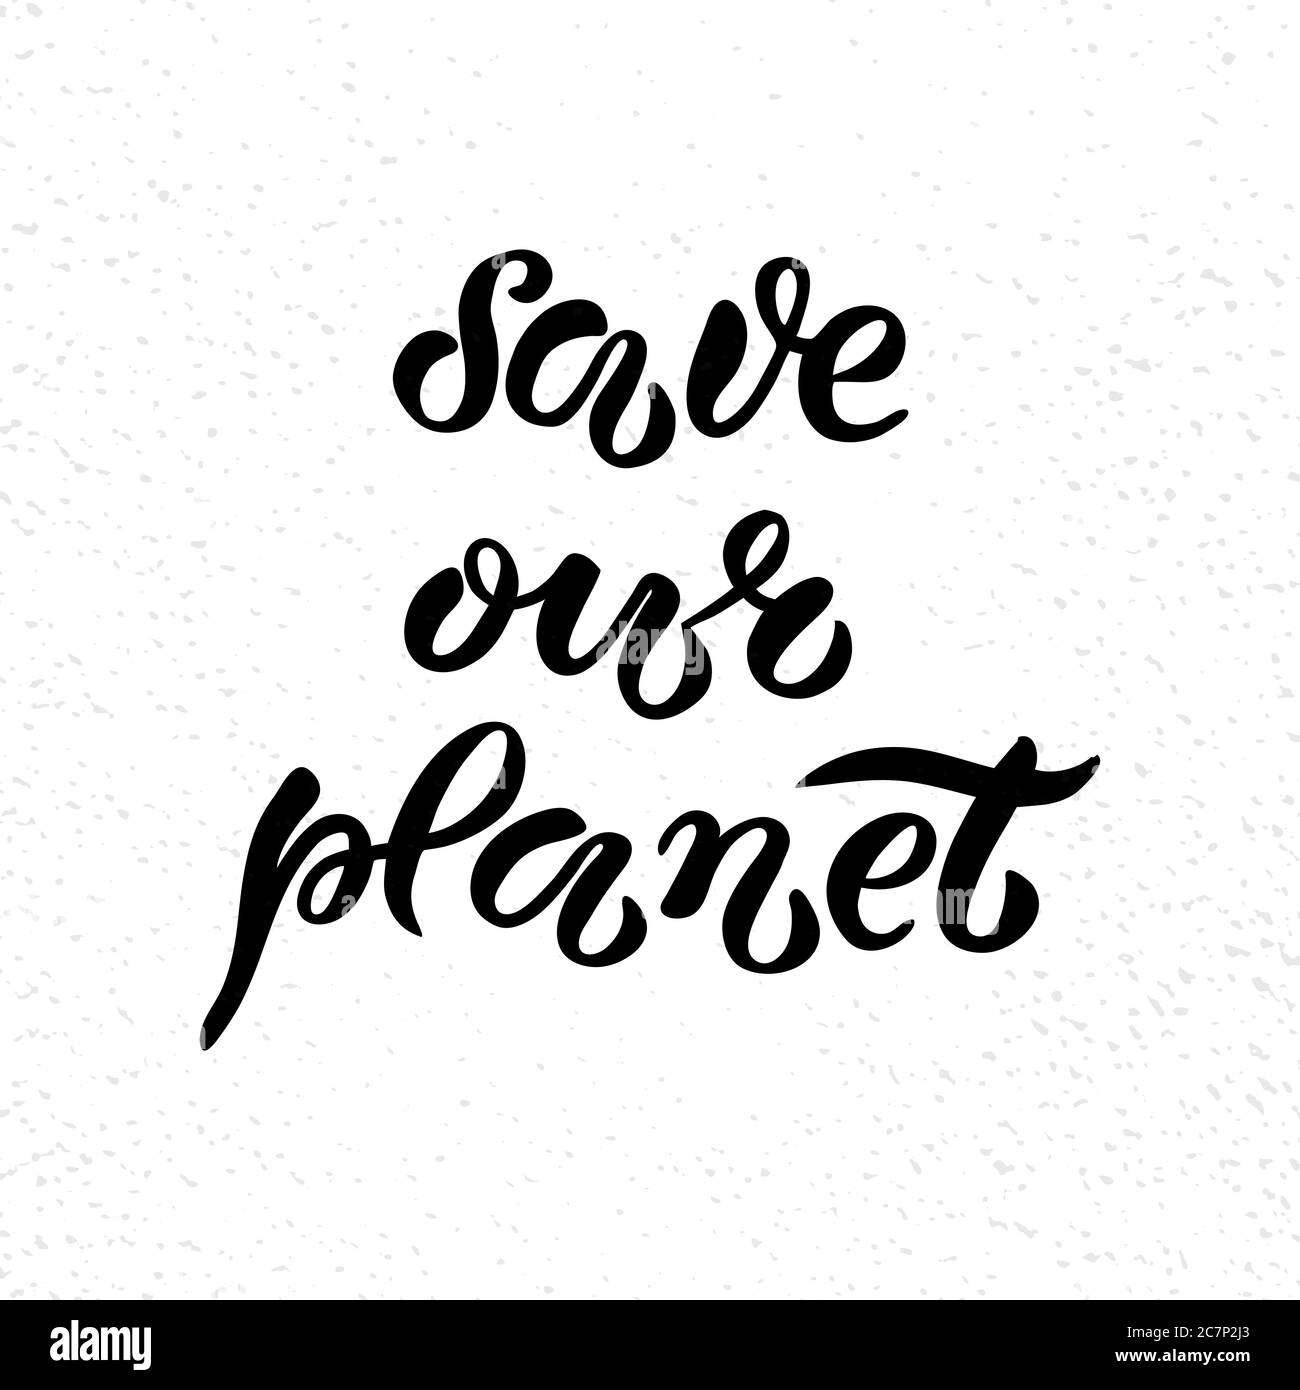 Hand-drawn and digitized lettering 'Save our planet', vector illustration EPS 10. Earth Day poster. Ecology theme illustration. Motivational text, drawn typography badge, card, banner, tag, logo.. Stock Vector